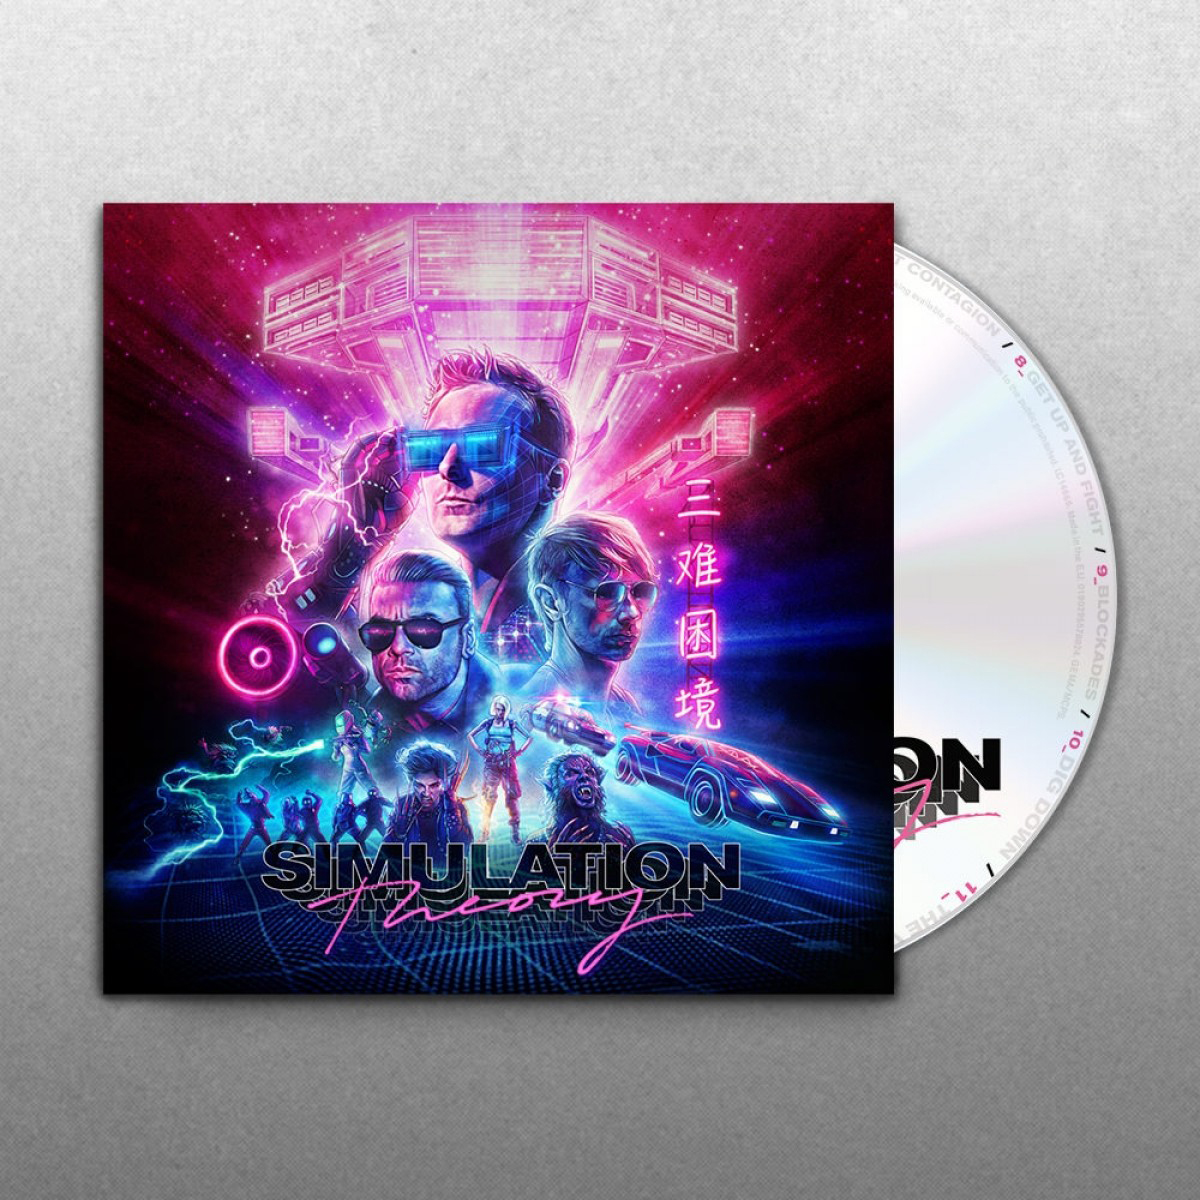 Muse - Simulation Theory - Deluxe CD